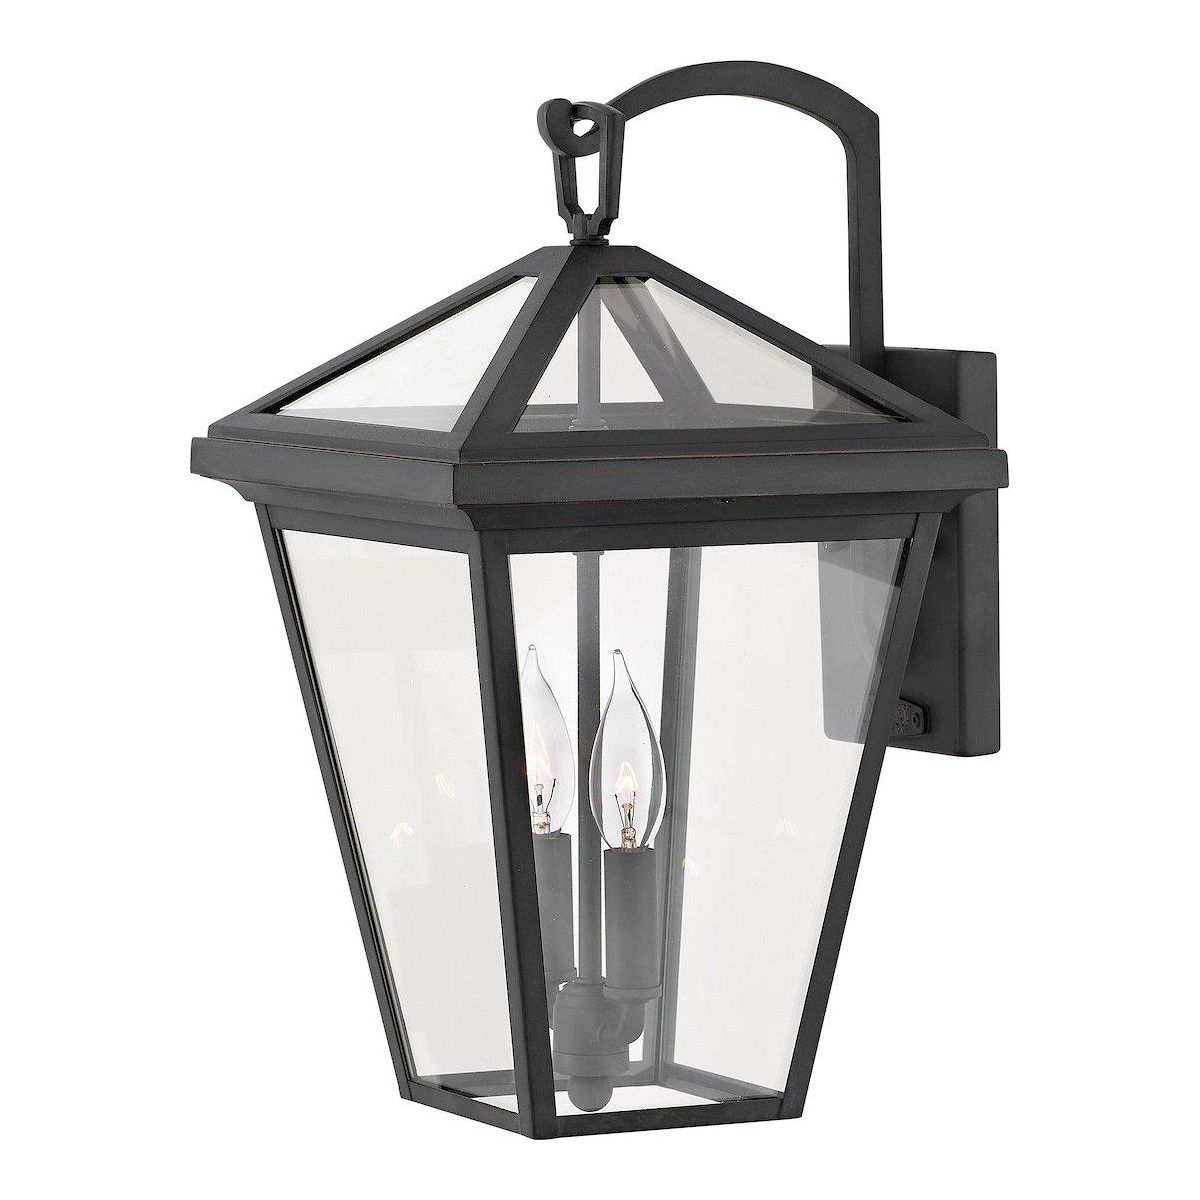 Hinkley - Alford Place Outdoor Wall Light - Lights Canada